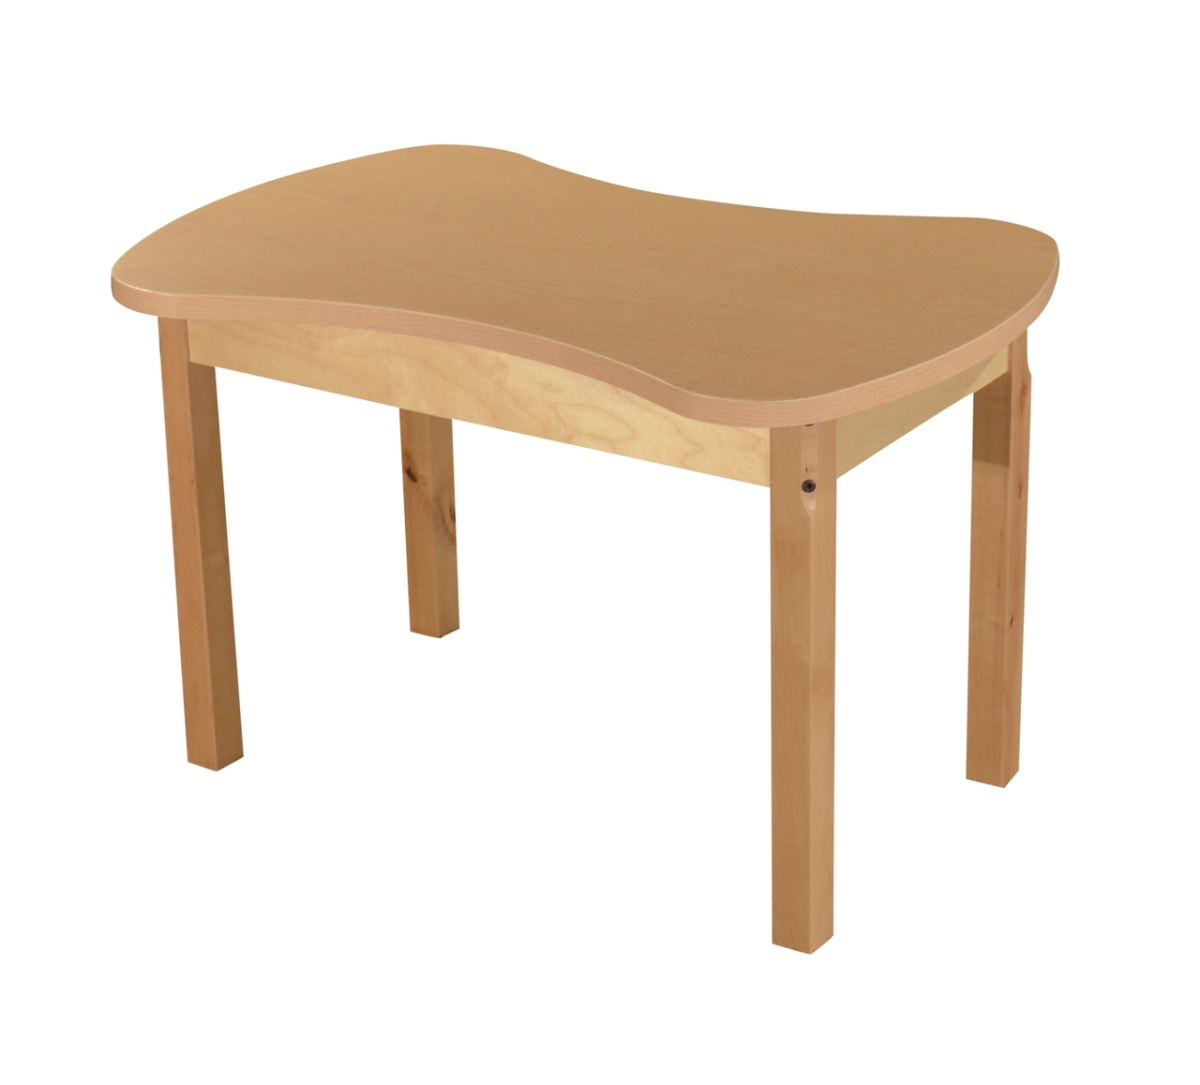 Picture of Wood Designs HPL2436C16 24 x 36 in. Synergy Junction, High Pressure Laminate Table with Hardwood Legs - 16 in.